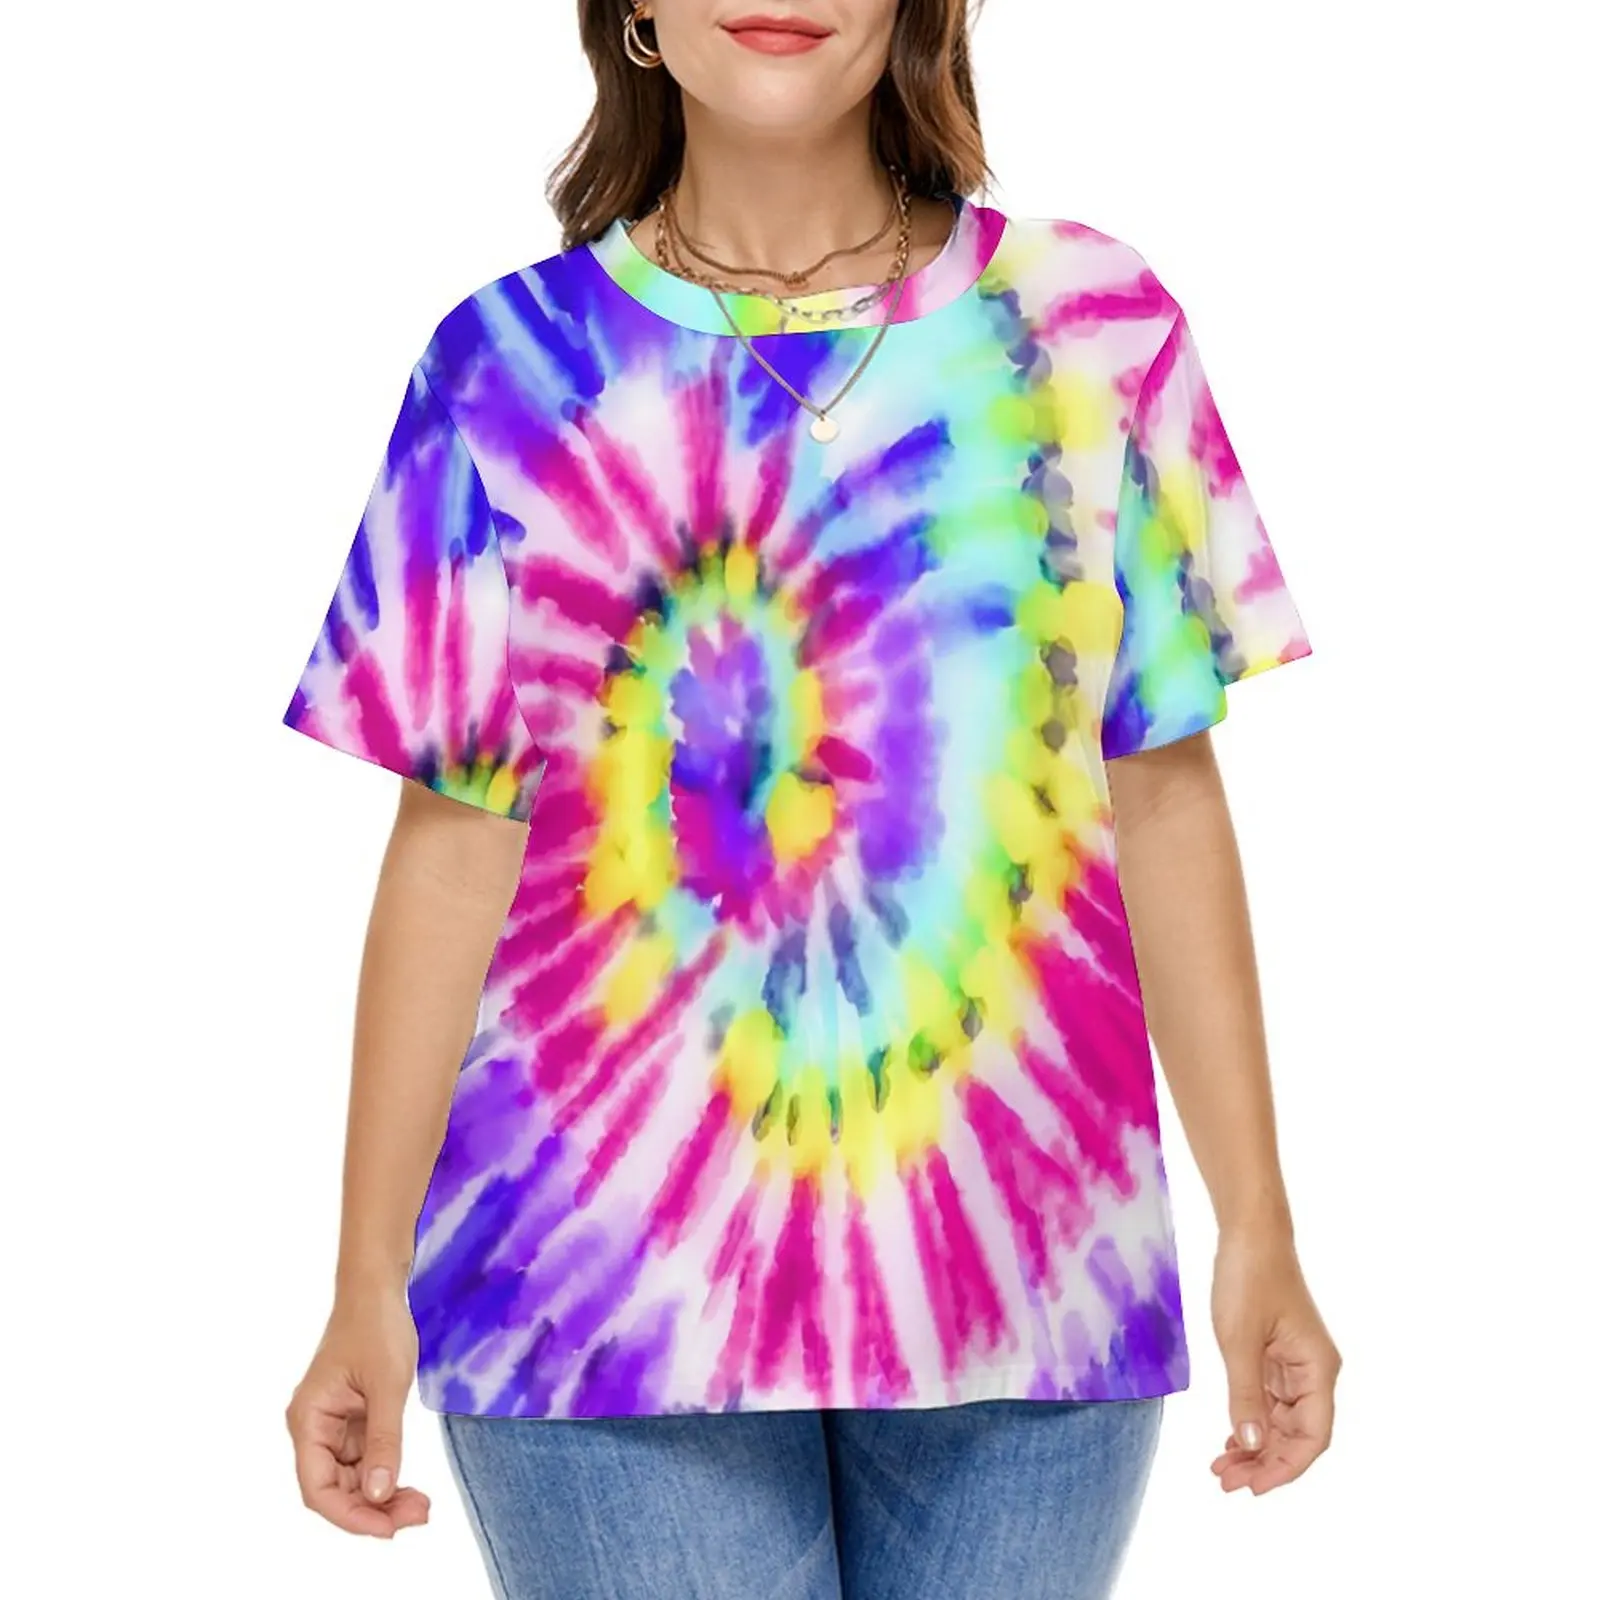 Tie Dye Watercolor T-Shirt Artsy Neon Rainbow Hip Hop T Shirts Short Sleeves Street Style Tee Shirt Sexy Graphic Tees Plus Size